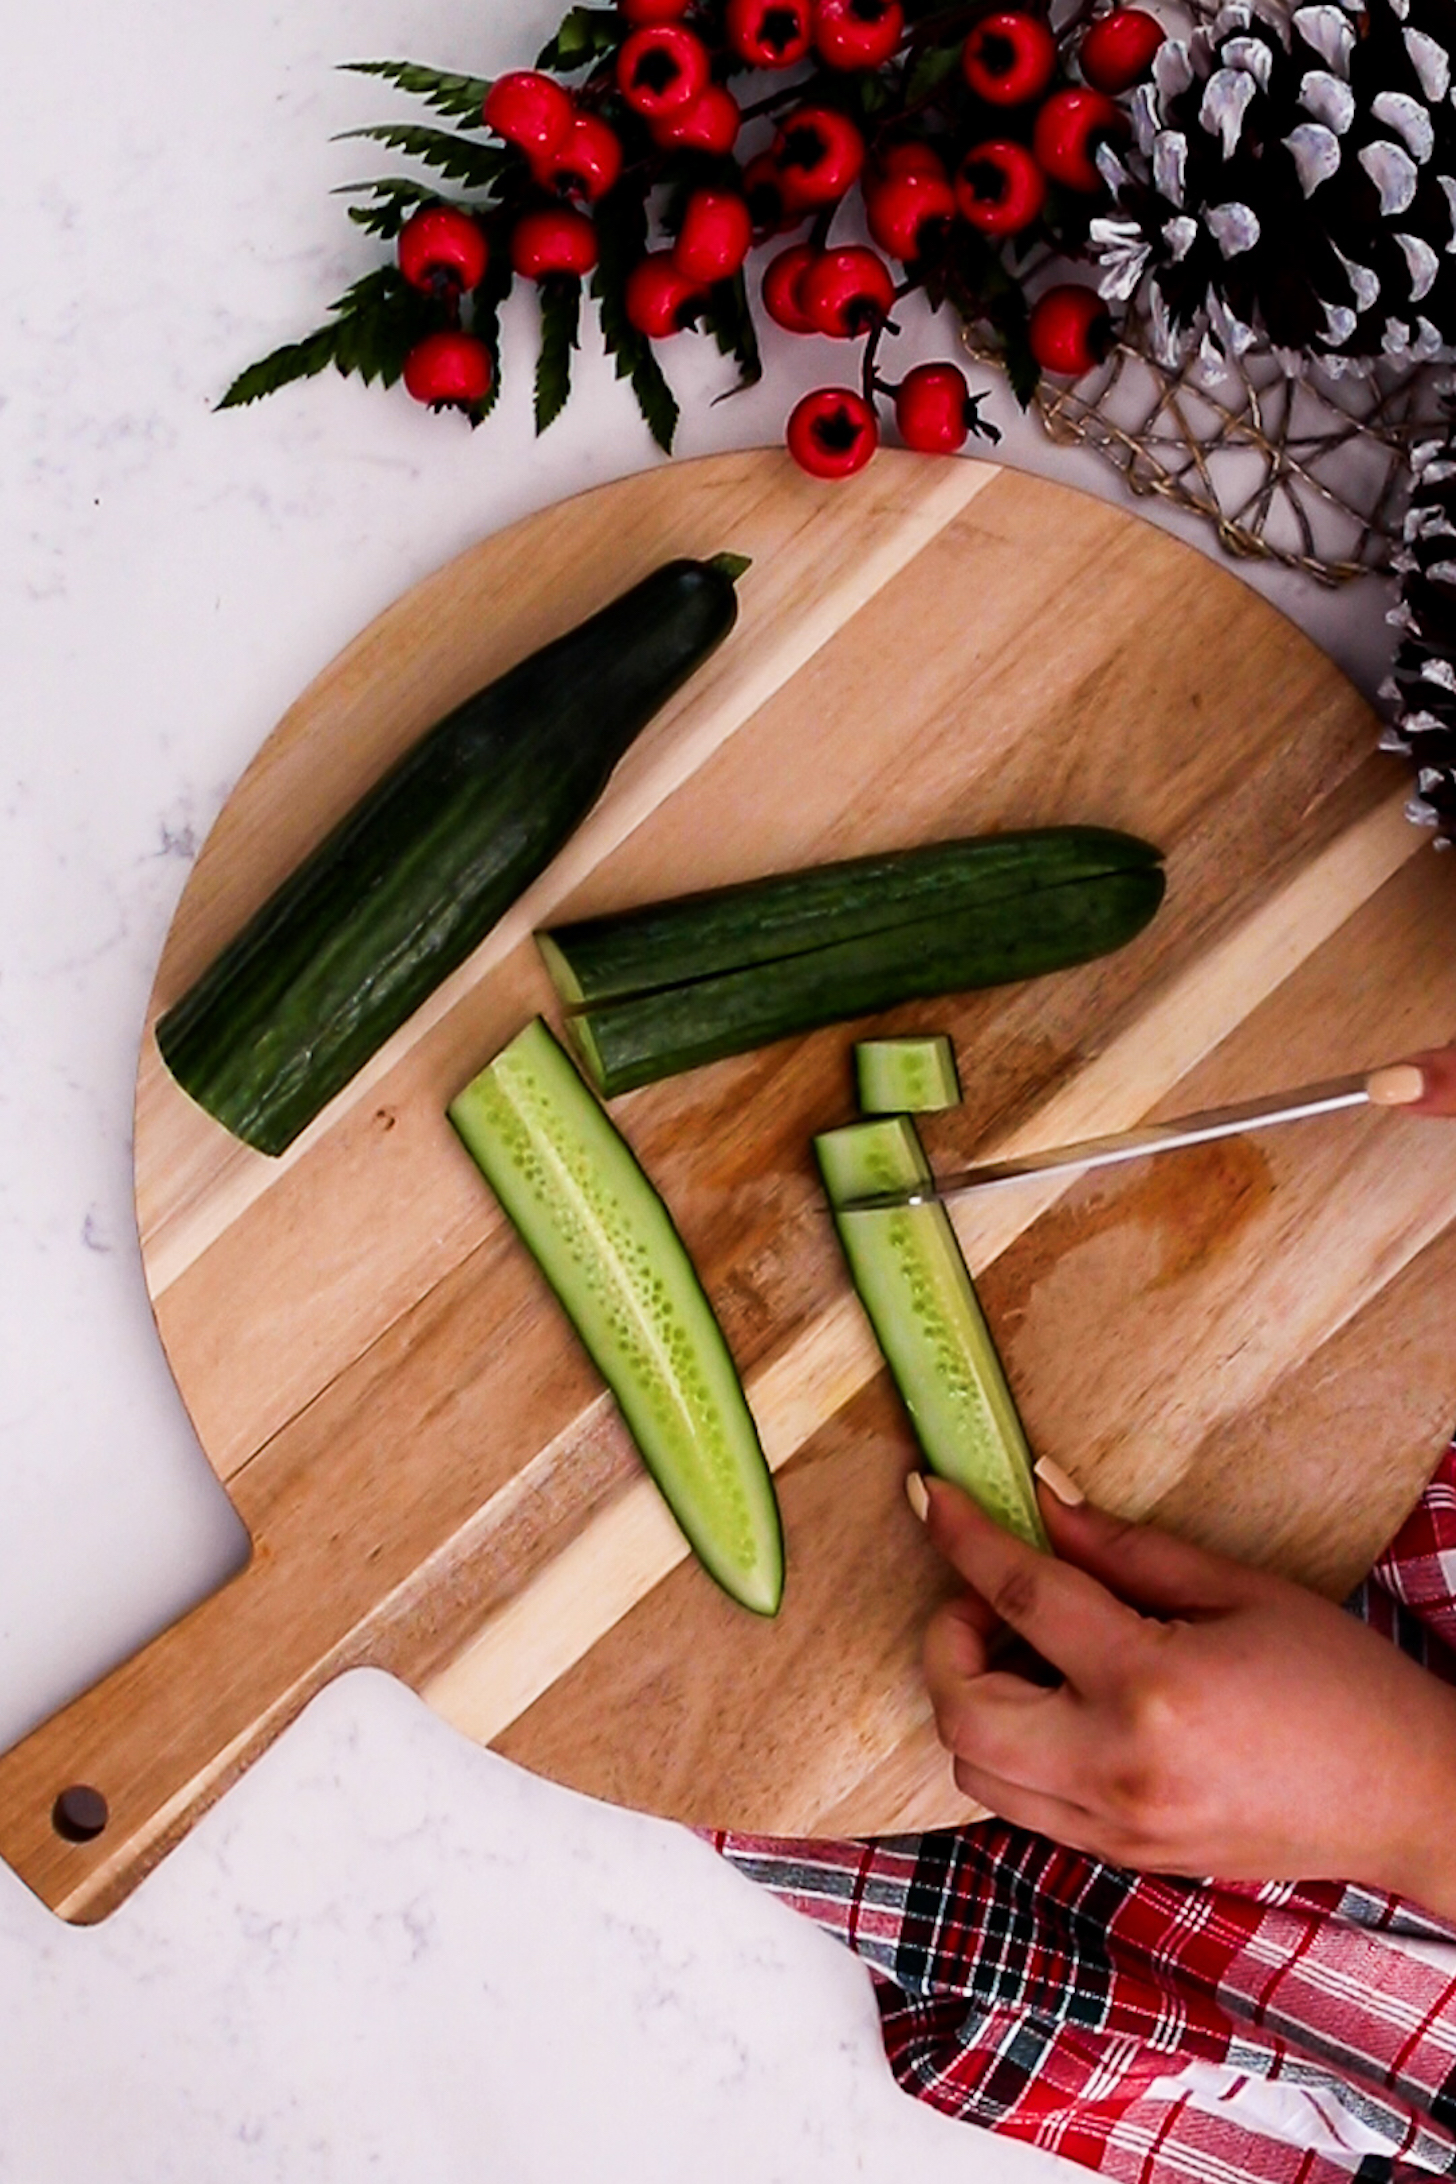 A hand is seen slicing a cucumber with a knife, surrounded by festive decorations.